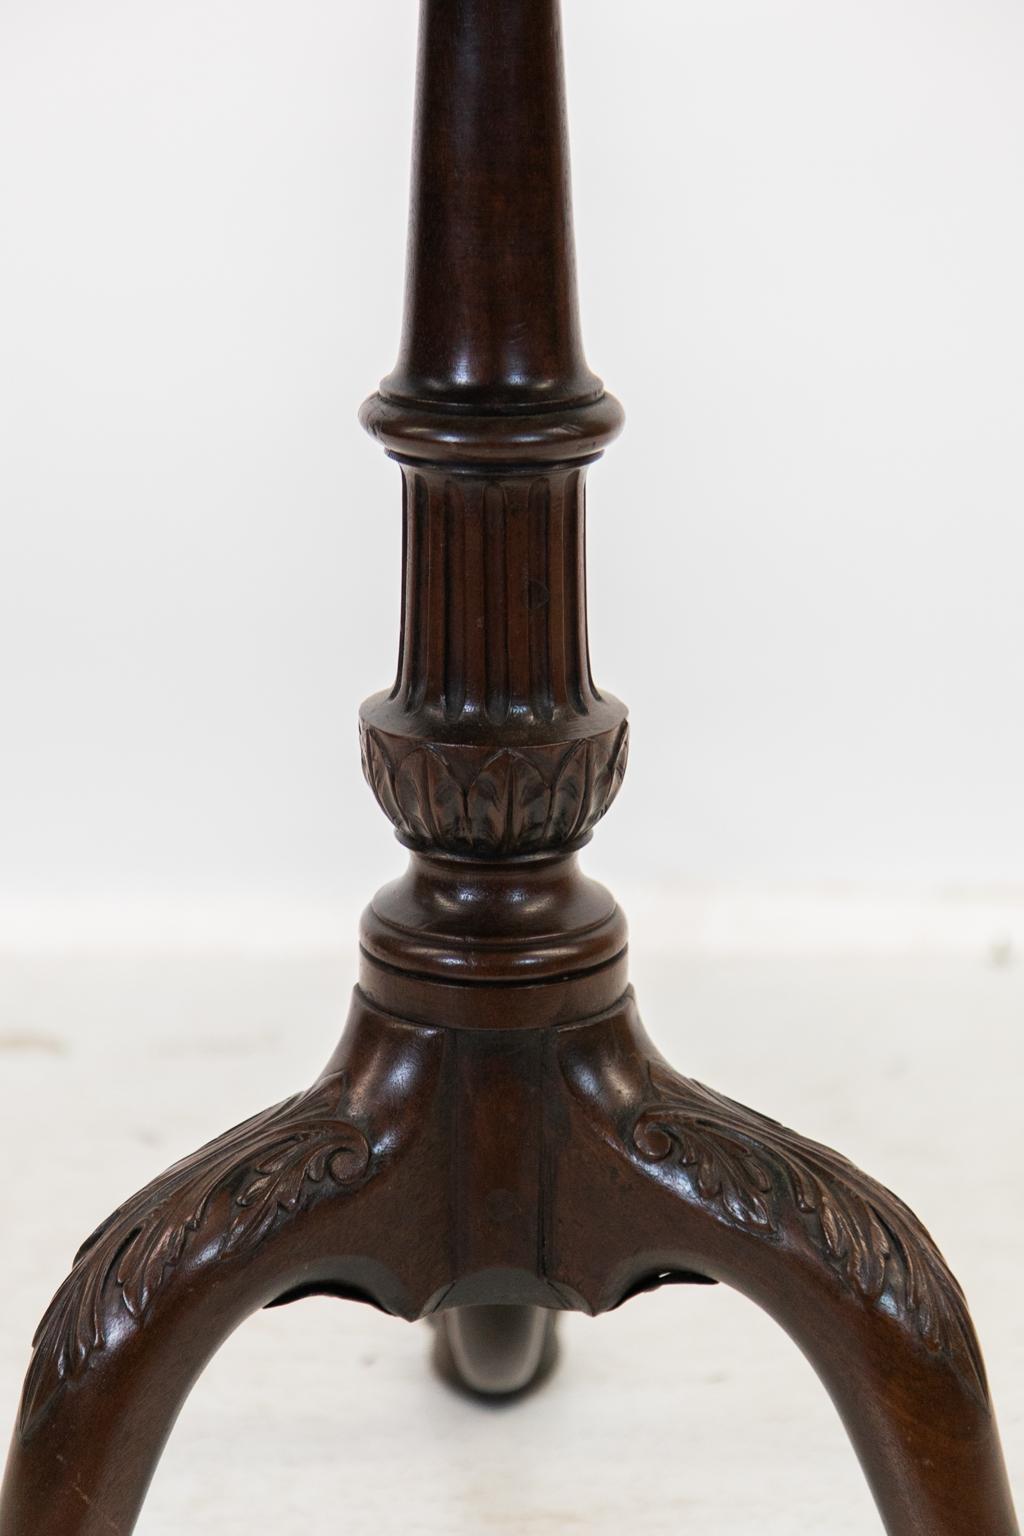 The top of this table has a carved scalloped piecrust edge. There is an old shrinkage crack in the top that has been restored. The turned column has fluting above the leaf carved knop. The legs have acanthus leaf carvings on the knees and terminate